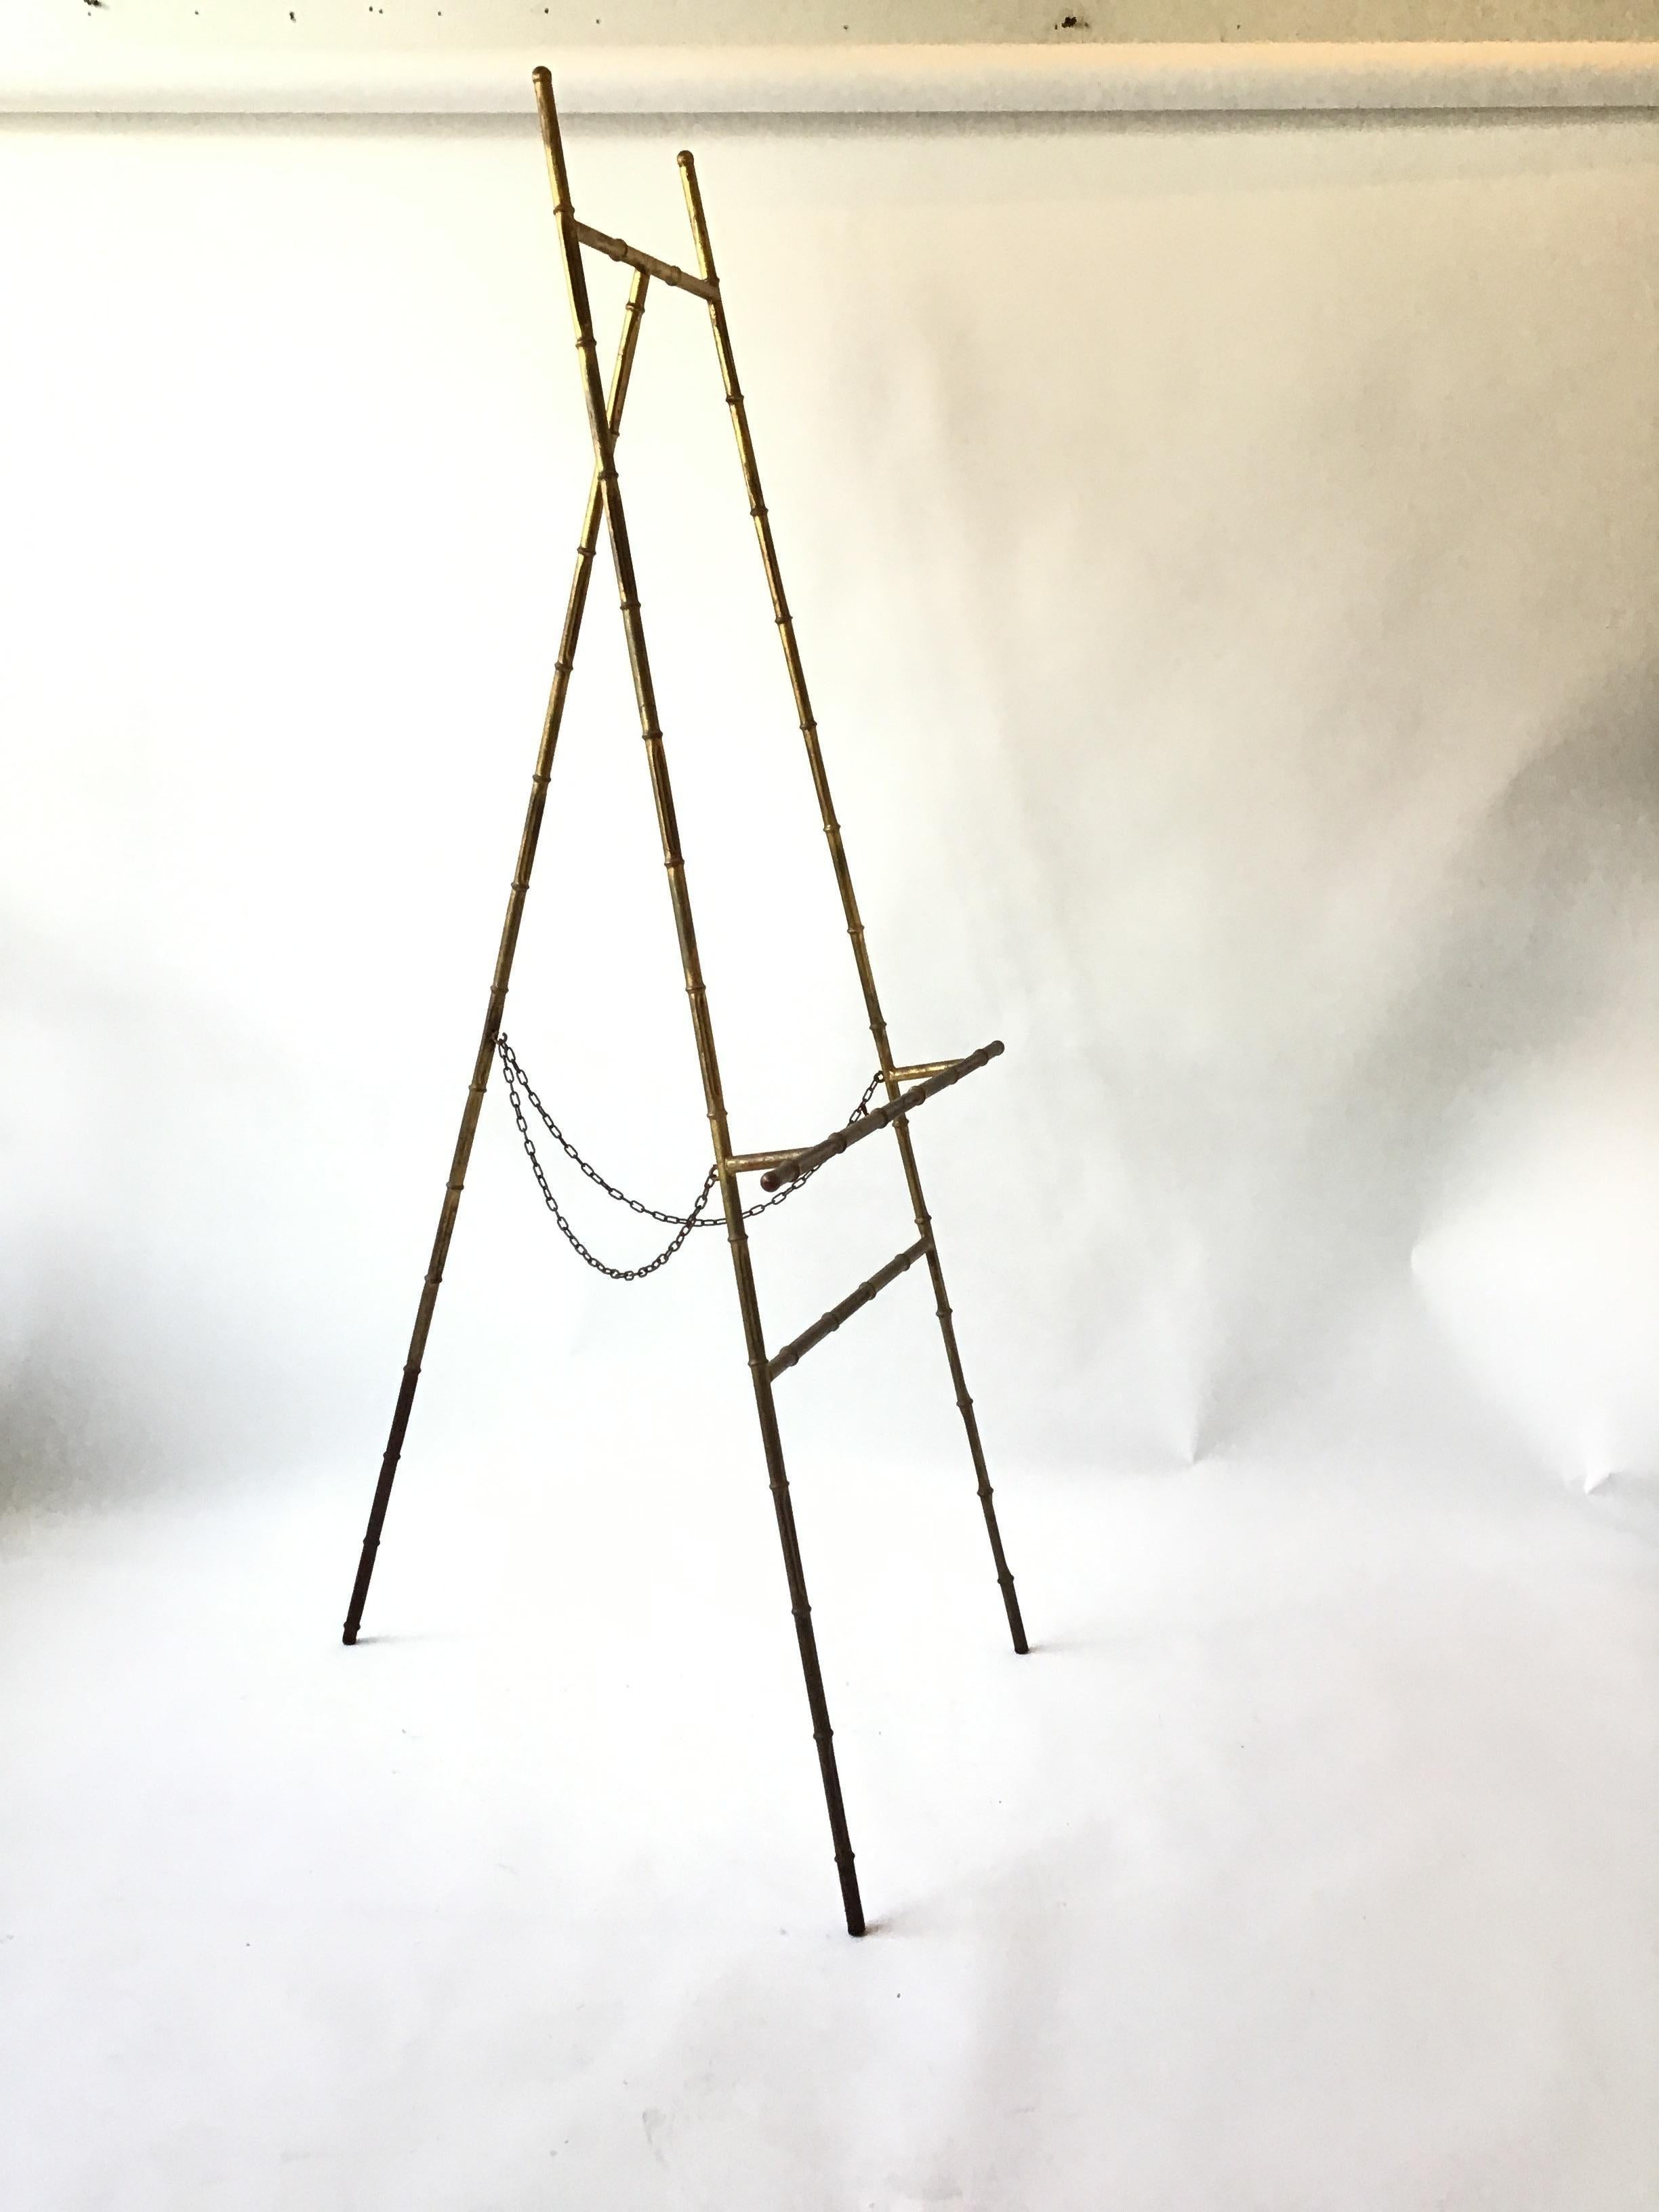 1960s faux bamboo gilt iron easel
Tagged made in Italy.